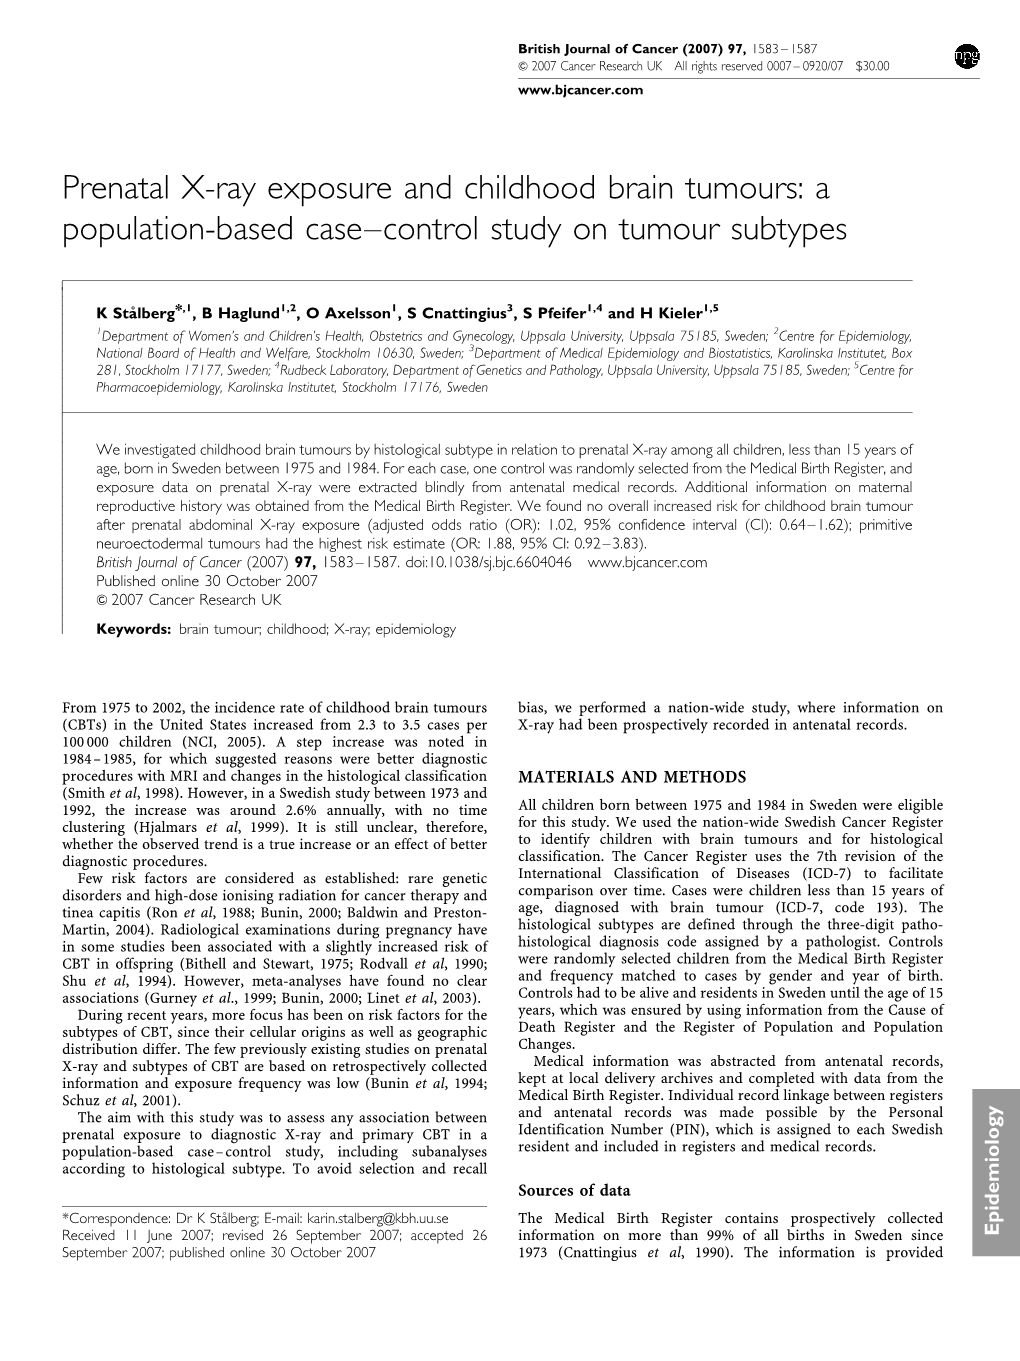 Prenatal X-Ray Exposure and Childhood Brain Tumours: a Population-Based Case–Control Study on Tumour Subtypes